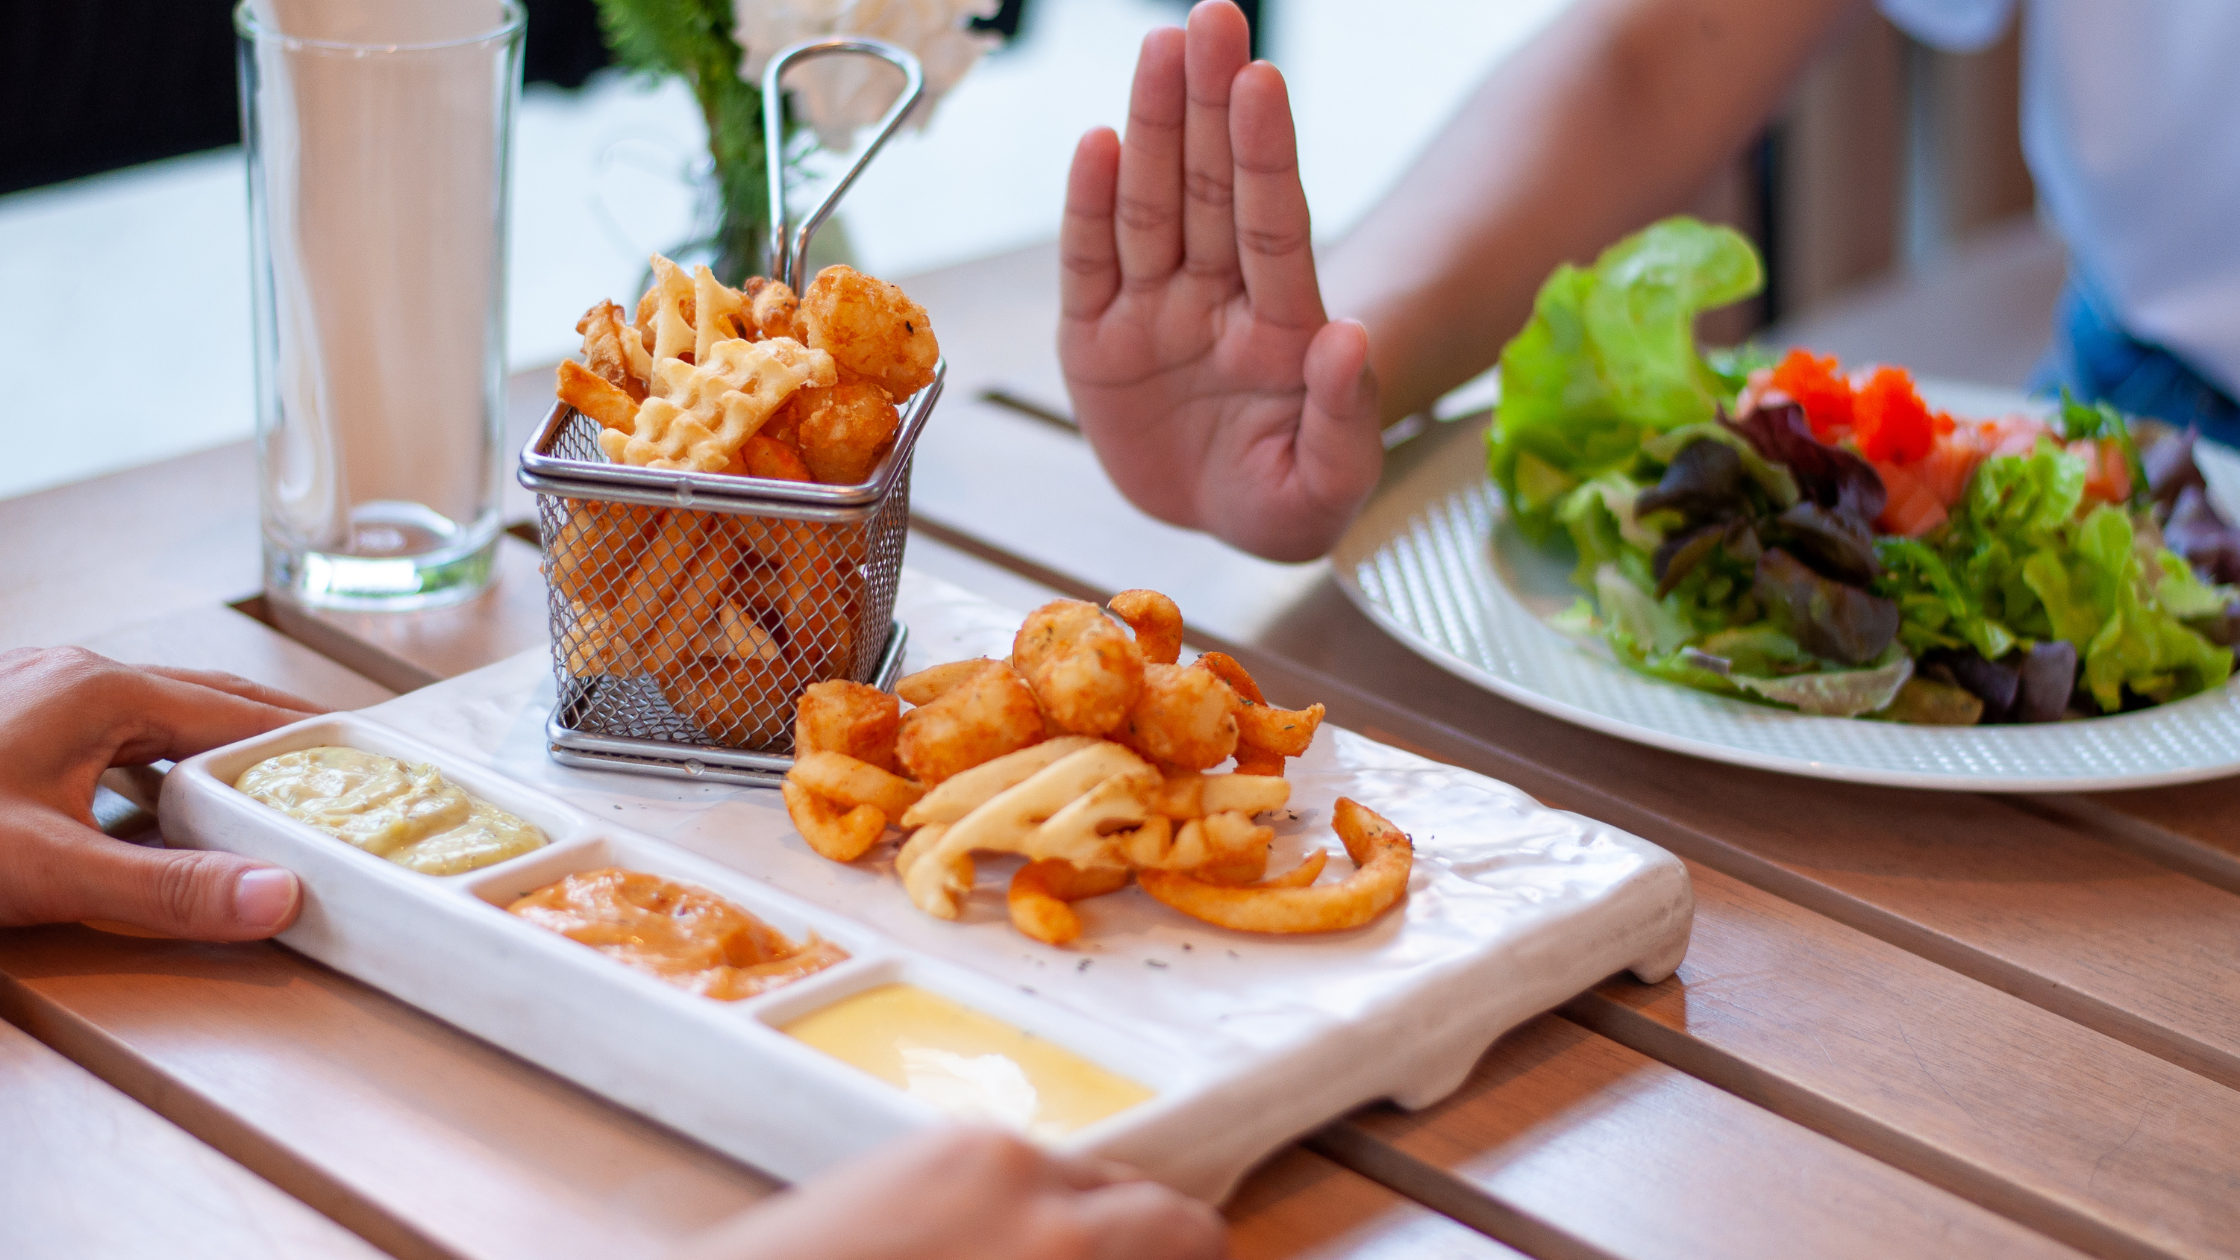 person eating a salad holds up a hand to refuse french fries